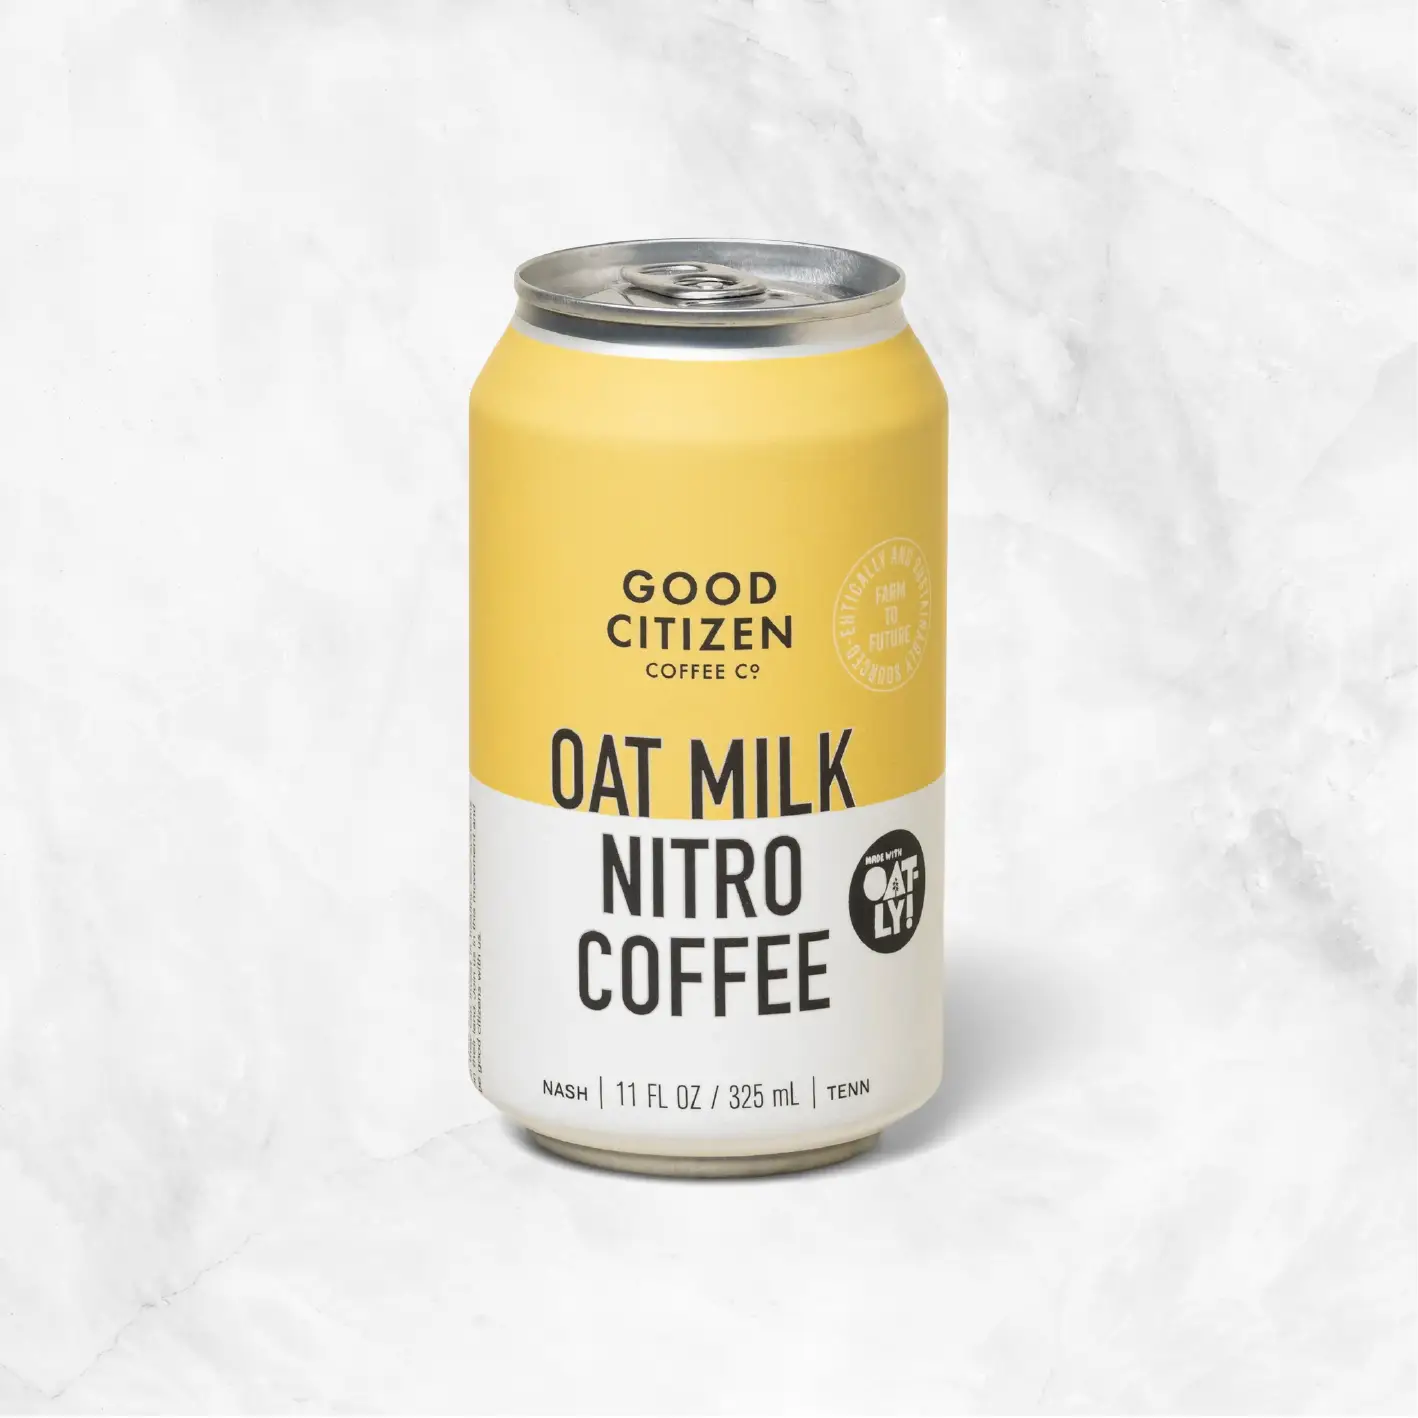 Oat Milk Nitro Coffee Cans Delivery